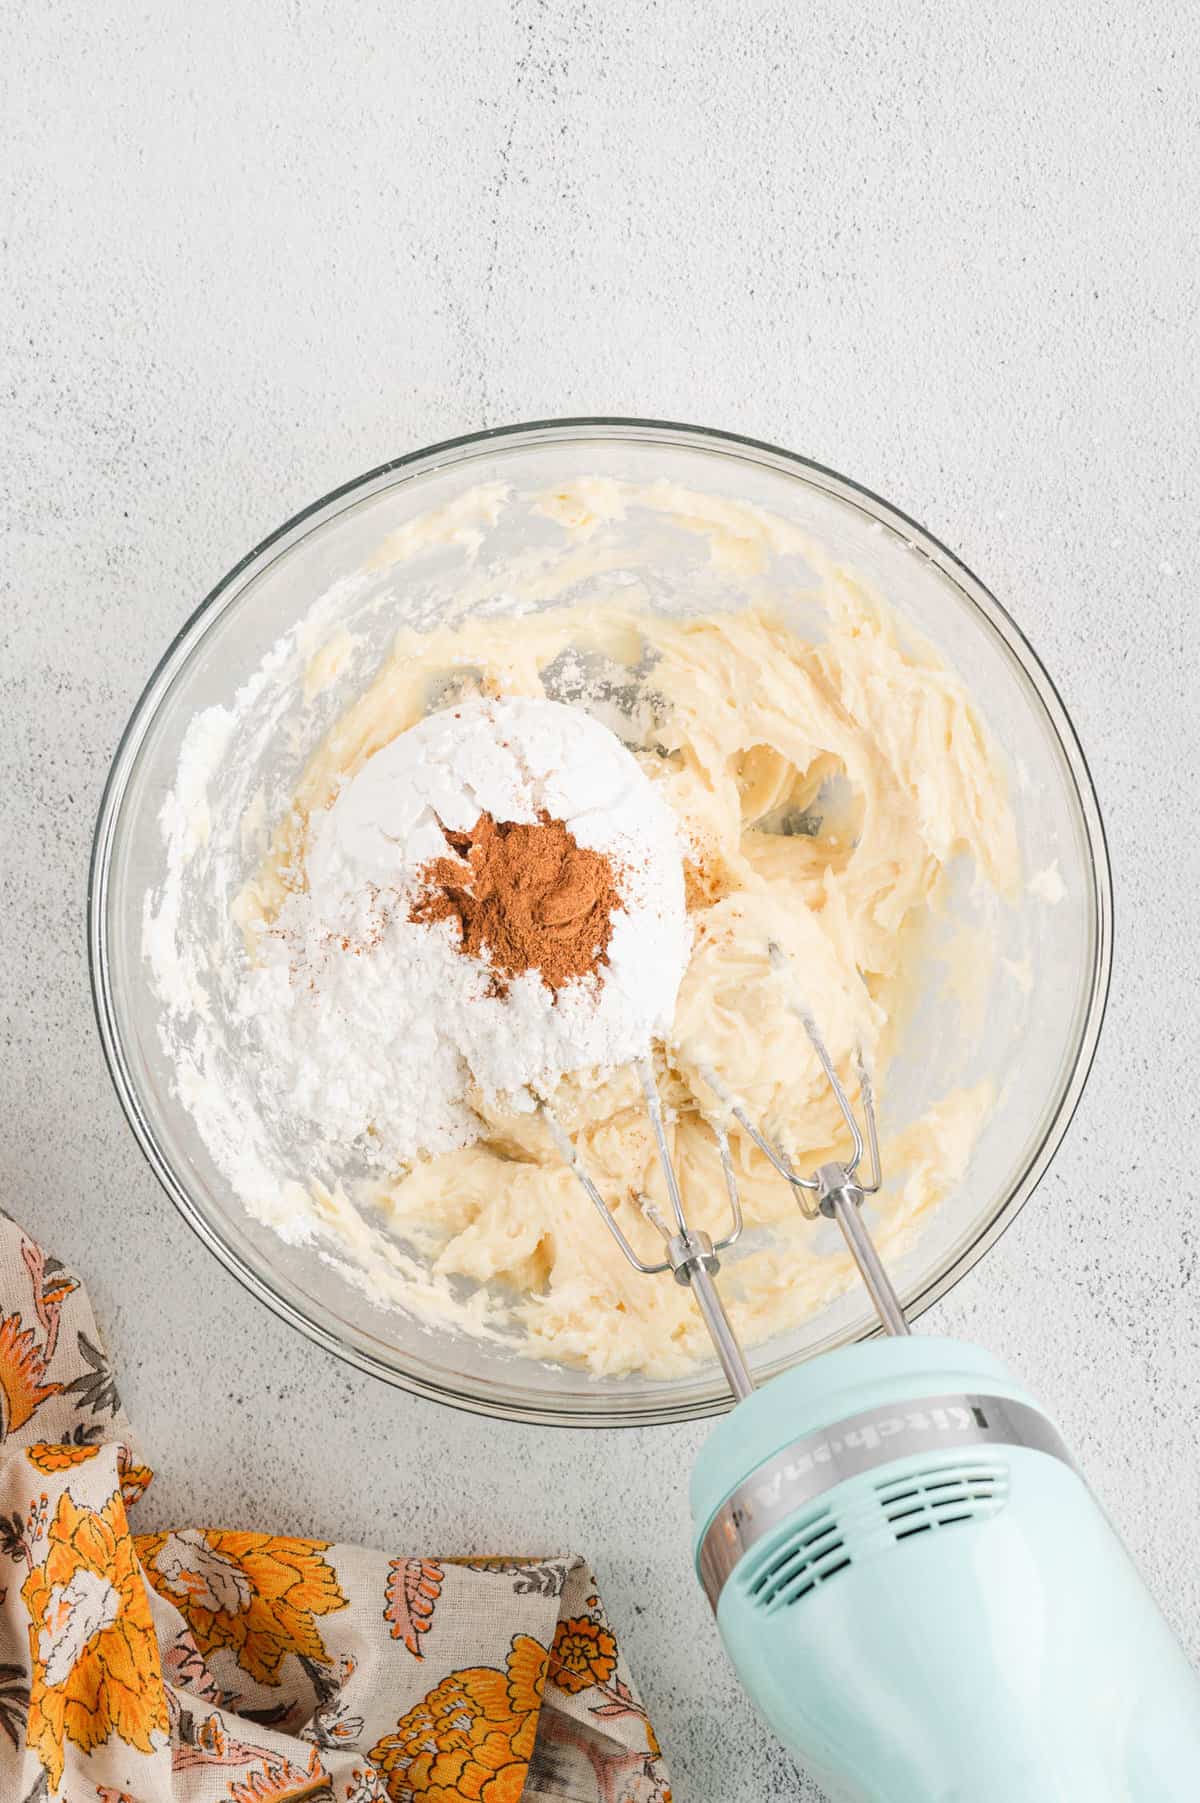 Adding dry ingredients to cream chese frosting mixture for Pumpkin Bars recipe